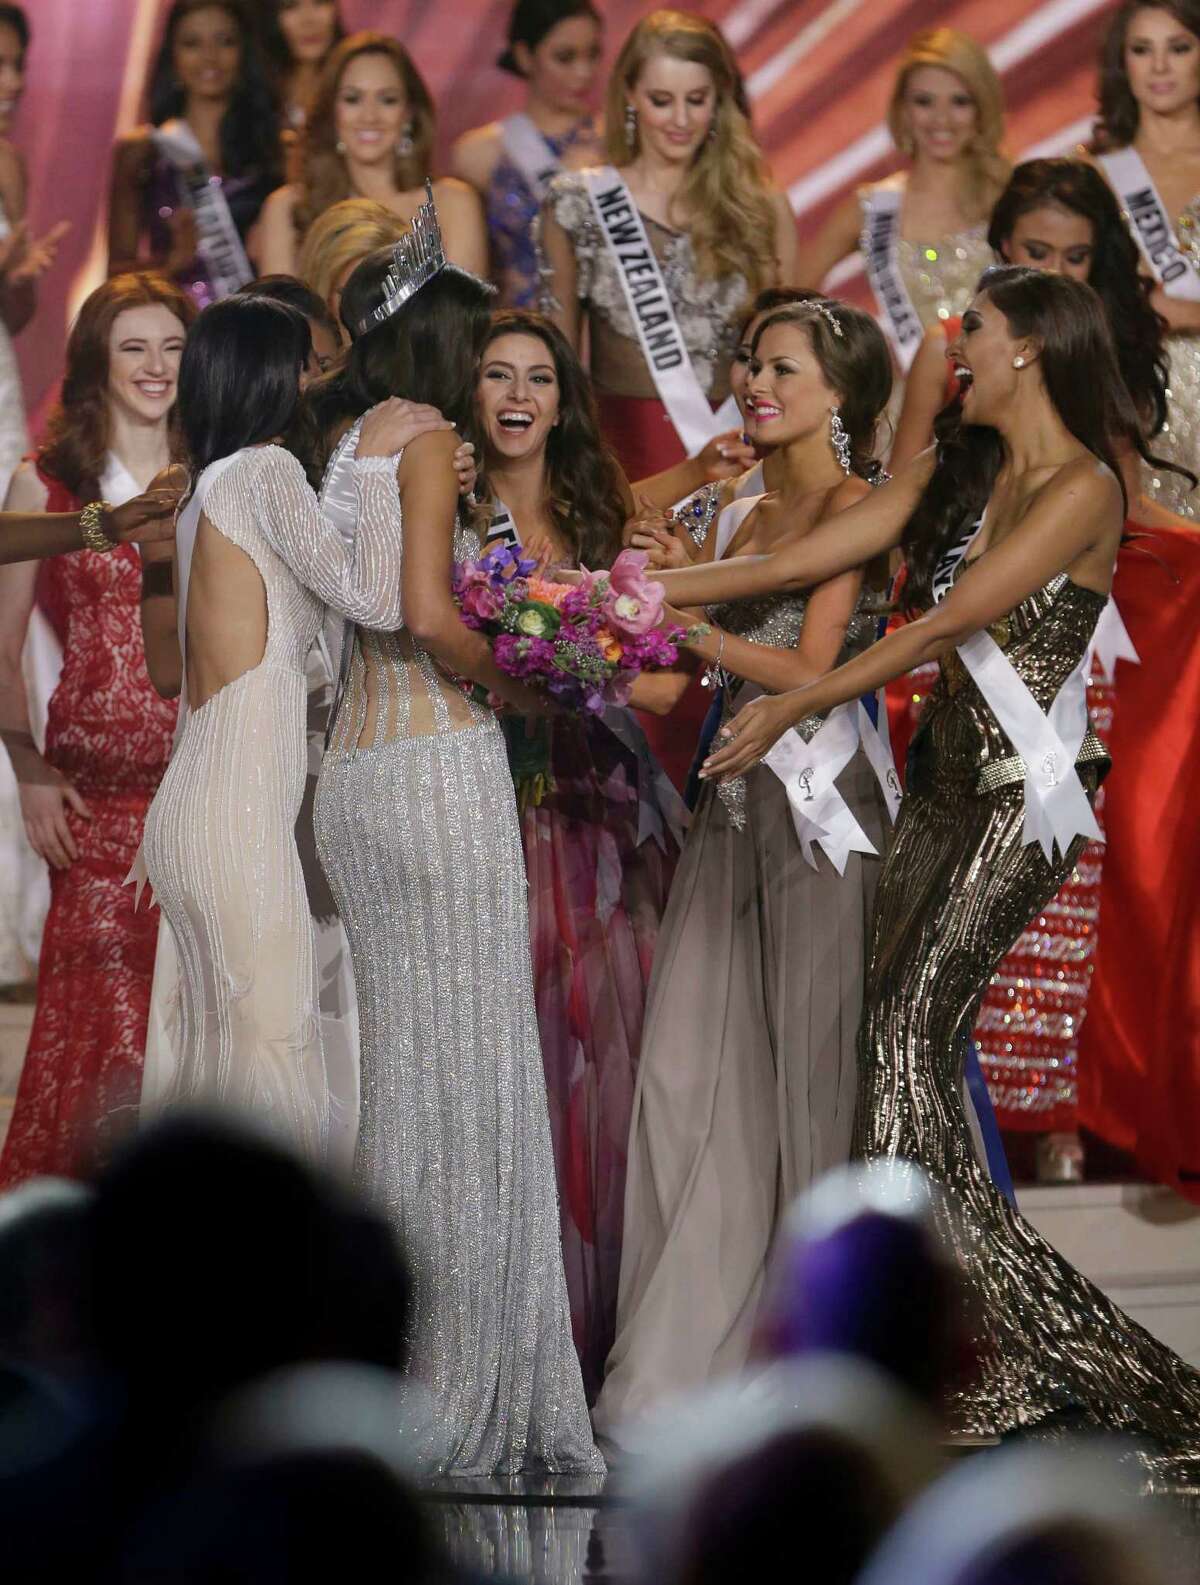 Miss Colombia Paulina Vega is congratulated by contestants after becoming Miss Universe at the Miss Universe pageant in Miami, Sunday, Jan. 25, 2015.